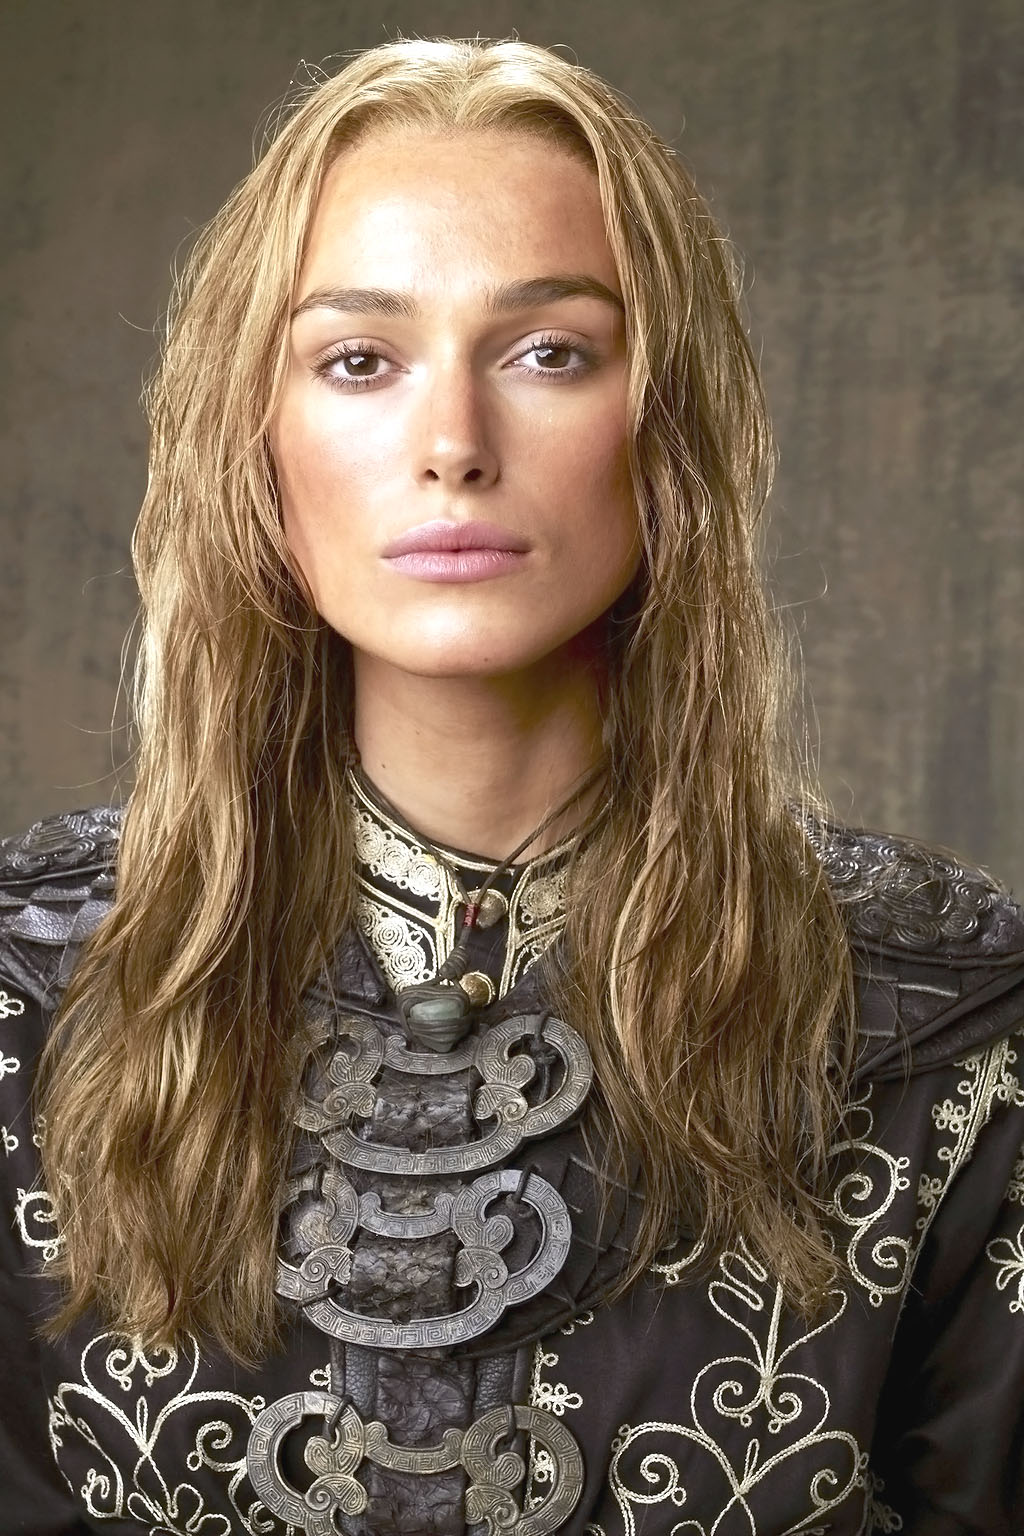 Keira Knightley Posing For The Promos Of The Movie Pirates Of The 